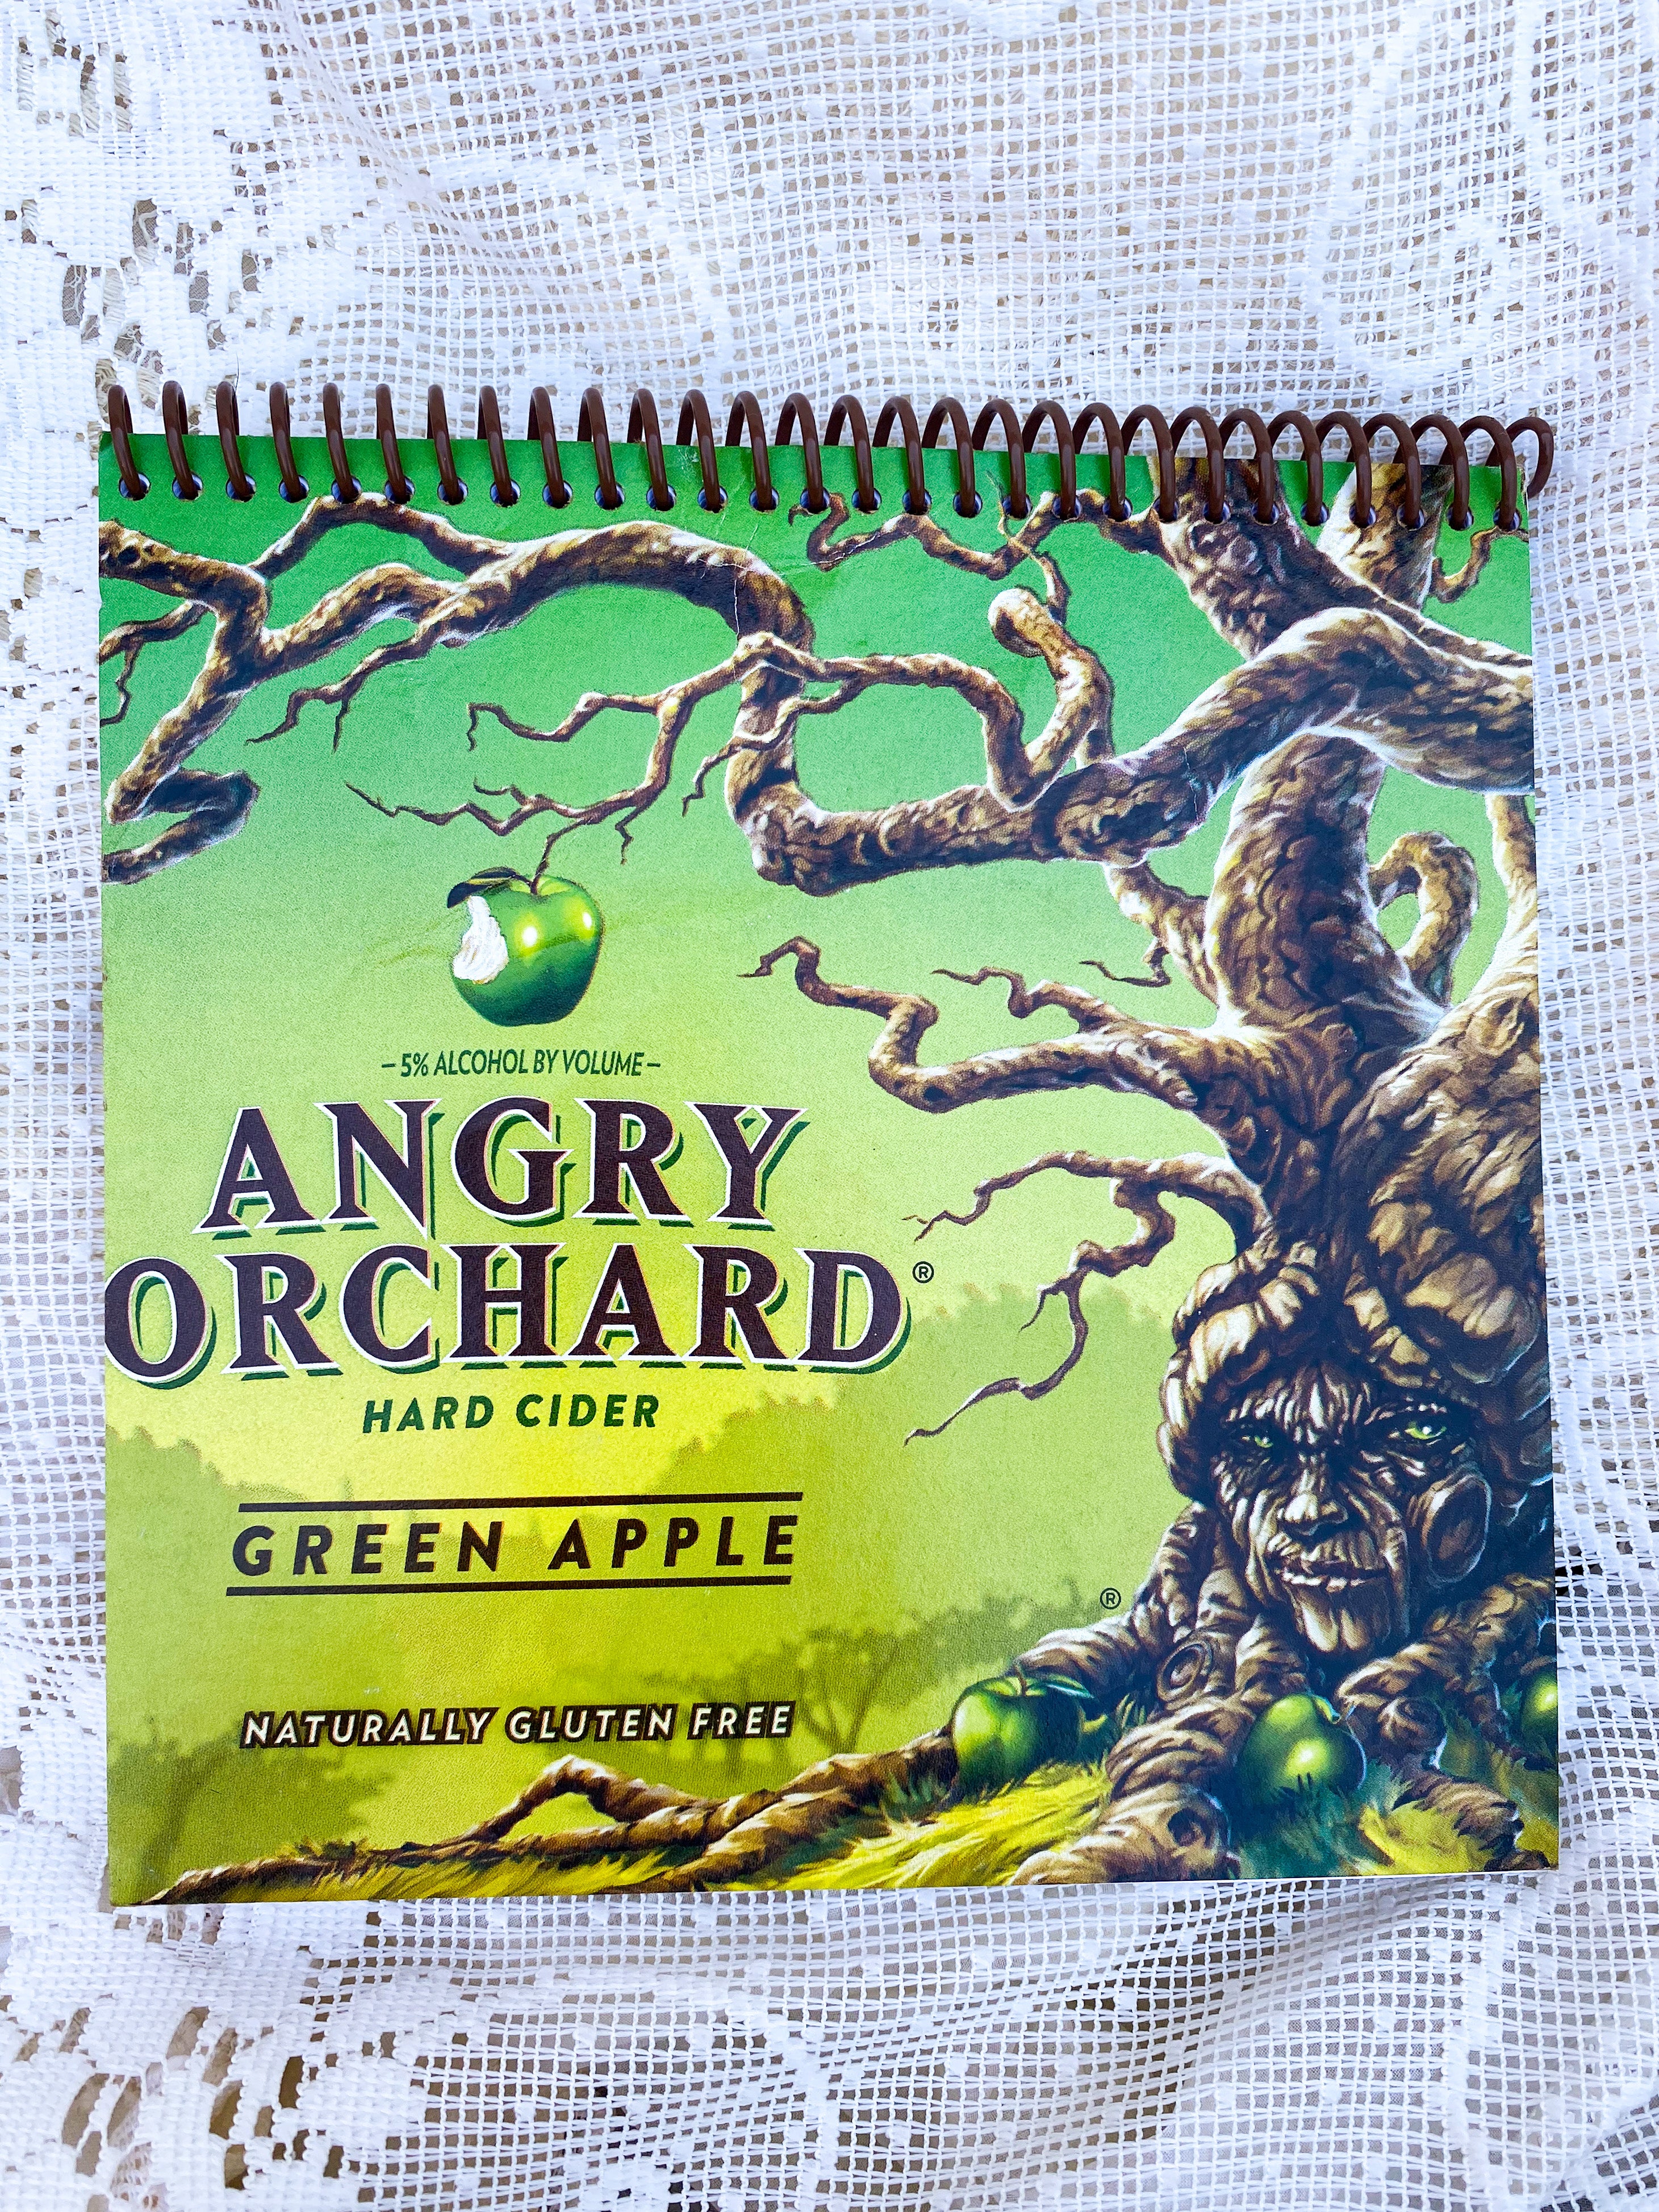 Angry Orchard Green Apple Recycled Beer Carton Notebook - Brown Spiral